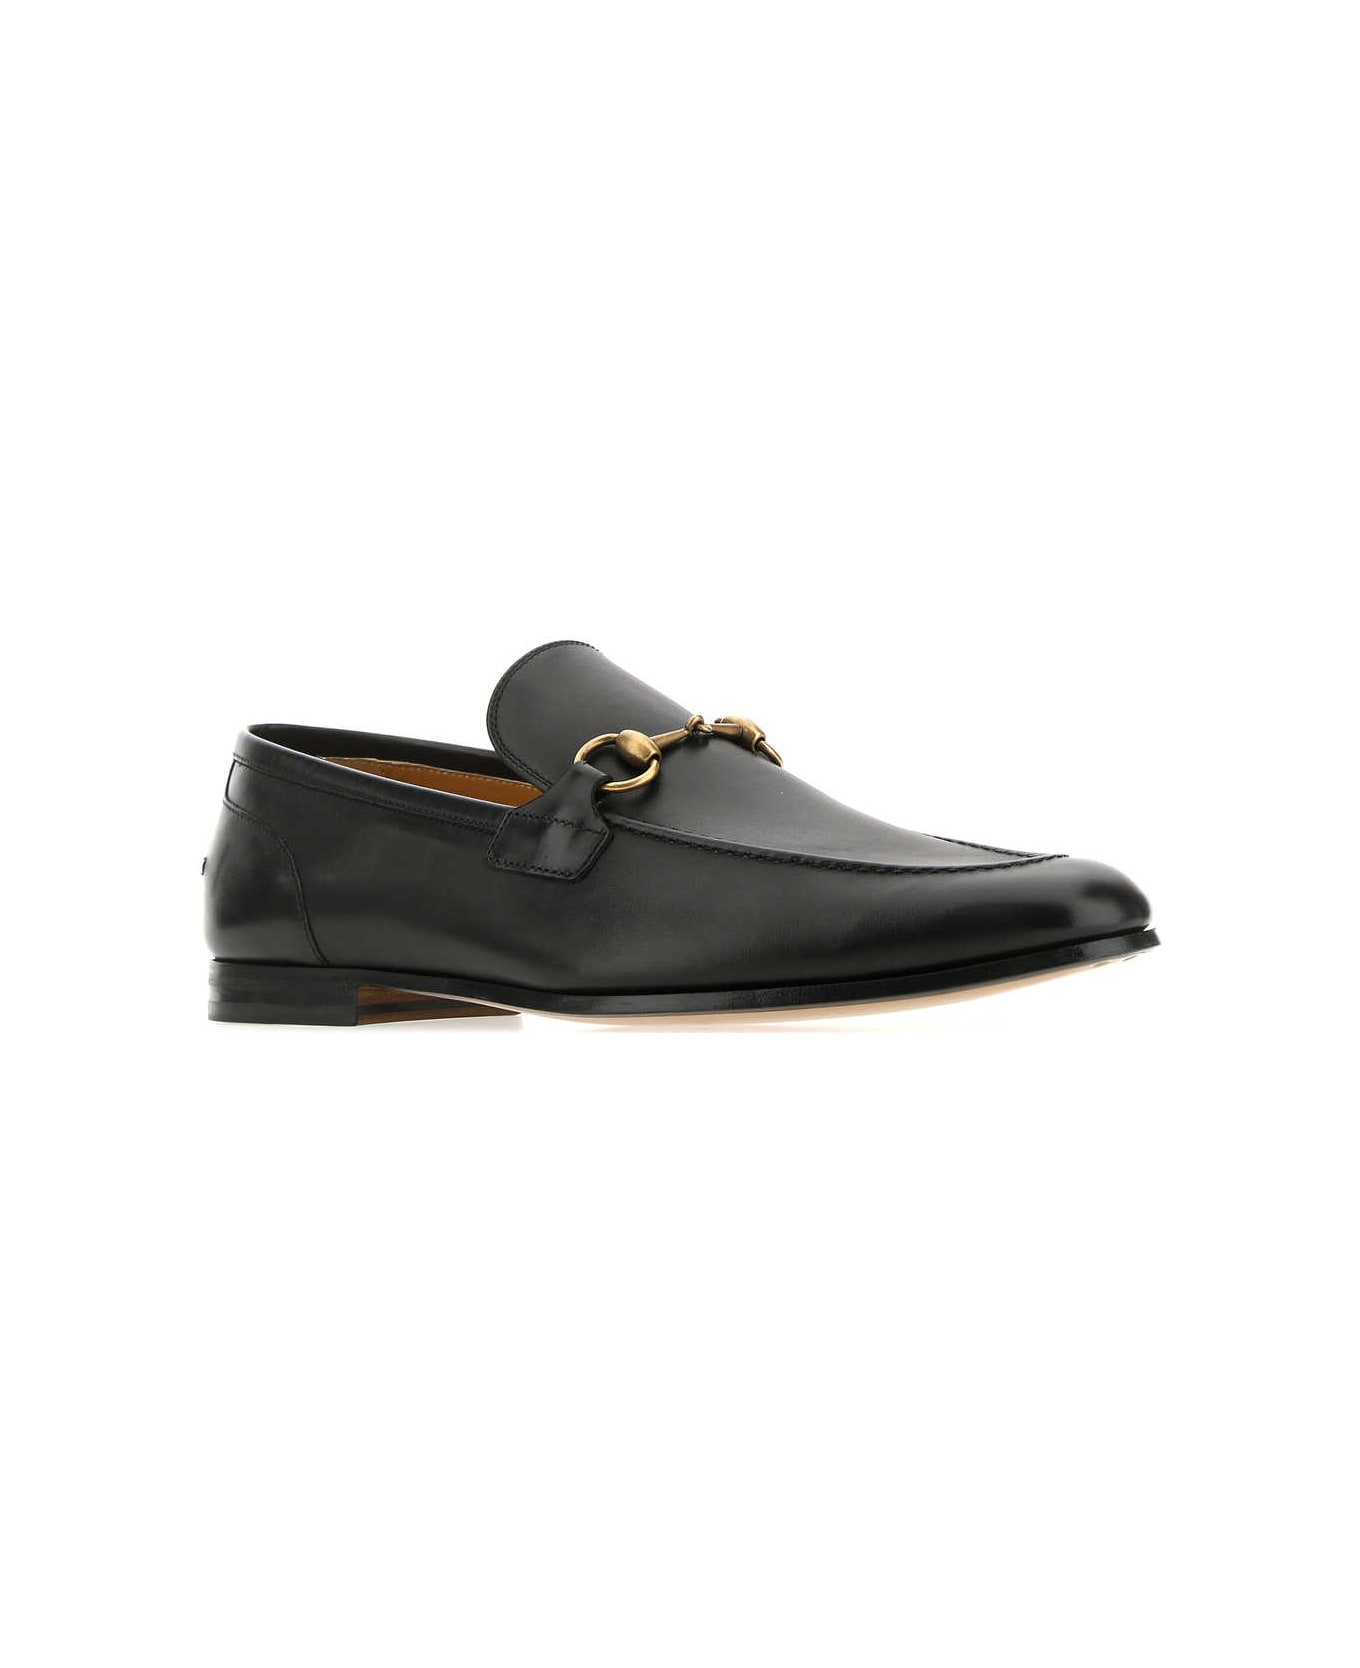 Gucci Black Leather Loafers - 1000